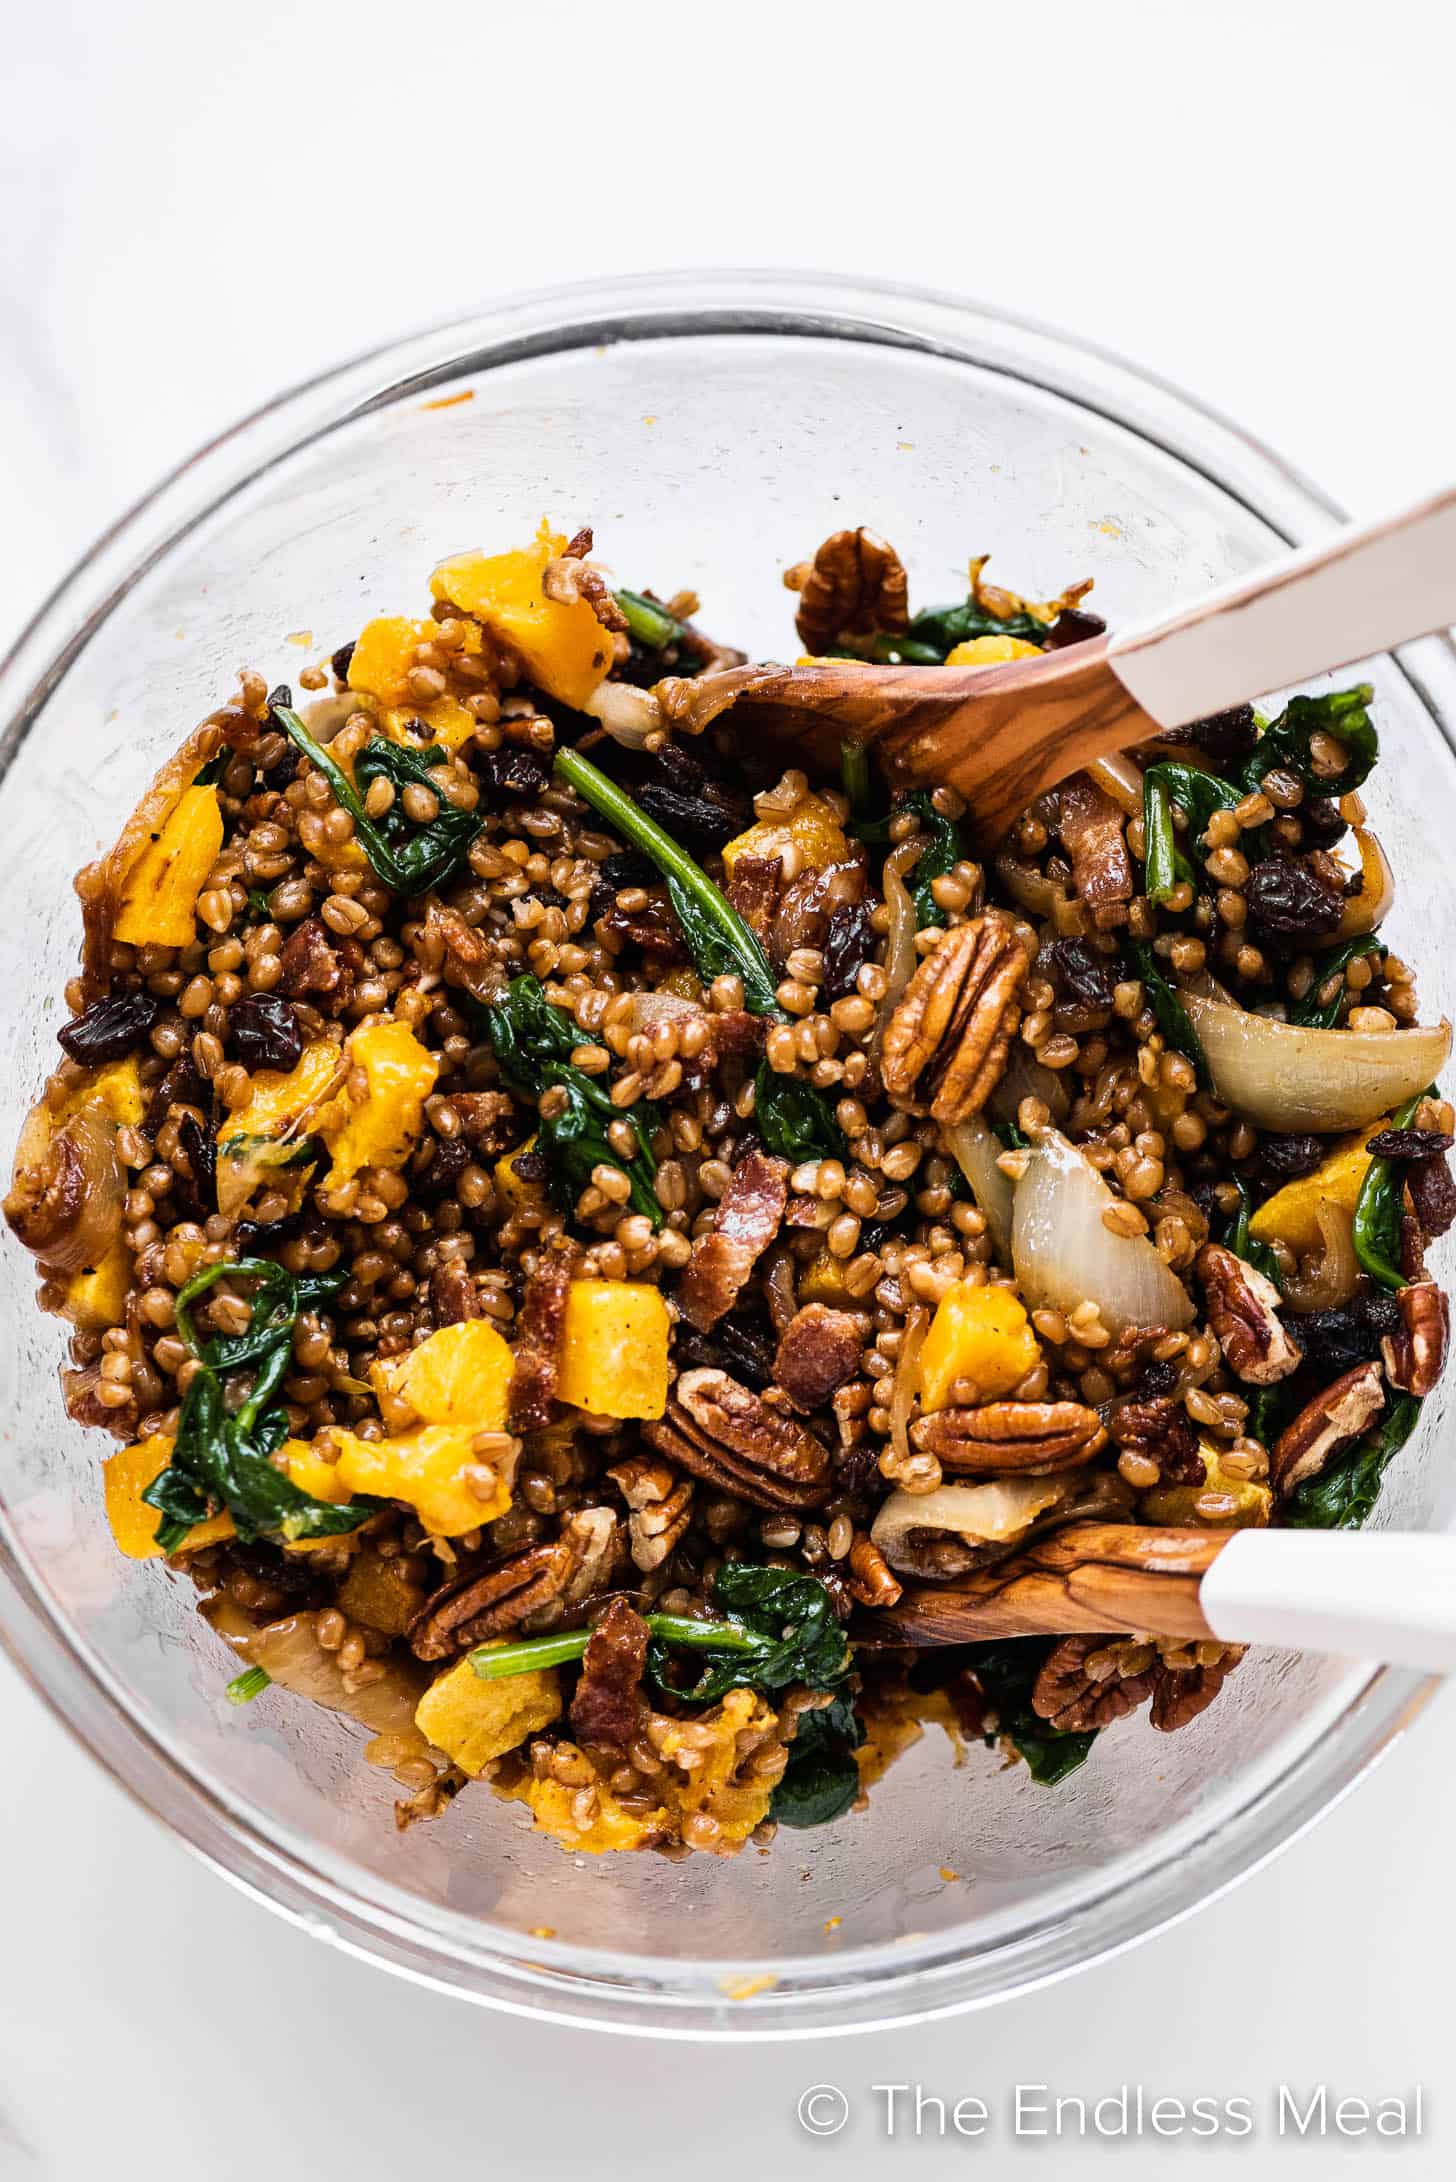 this Wheat Berry Recipe with caramelized onions and butternut squash